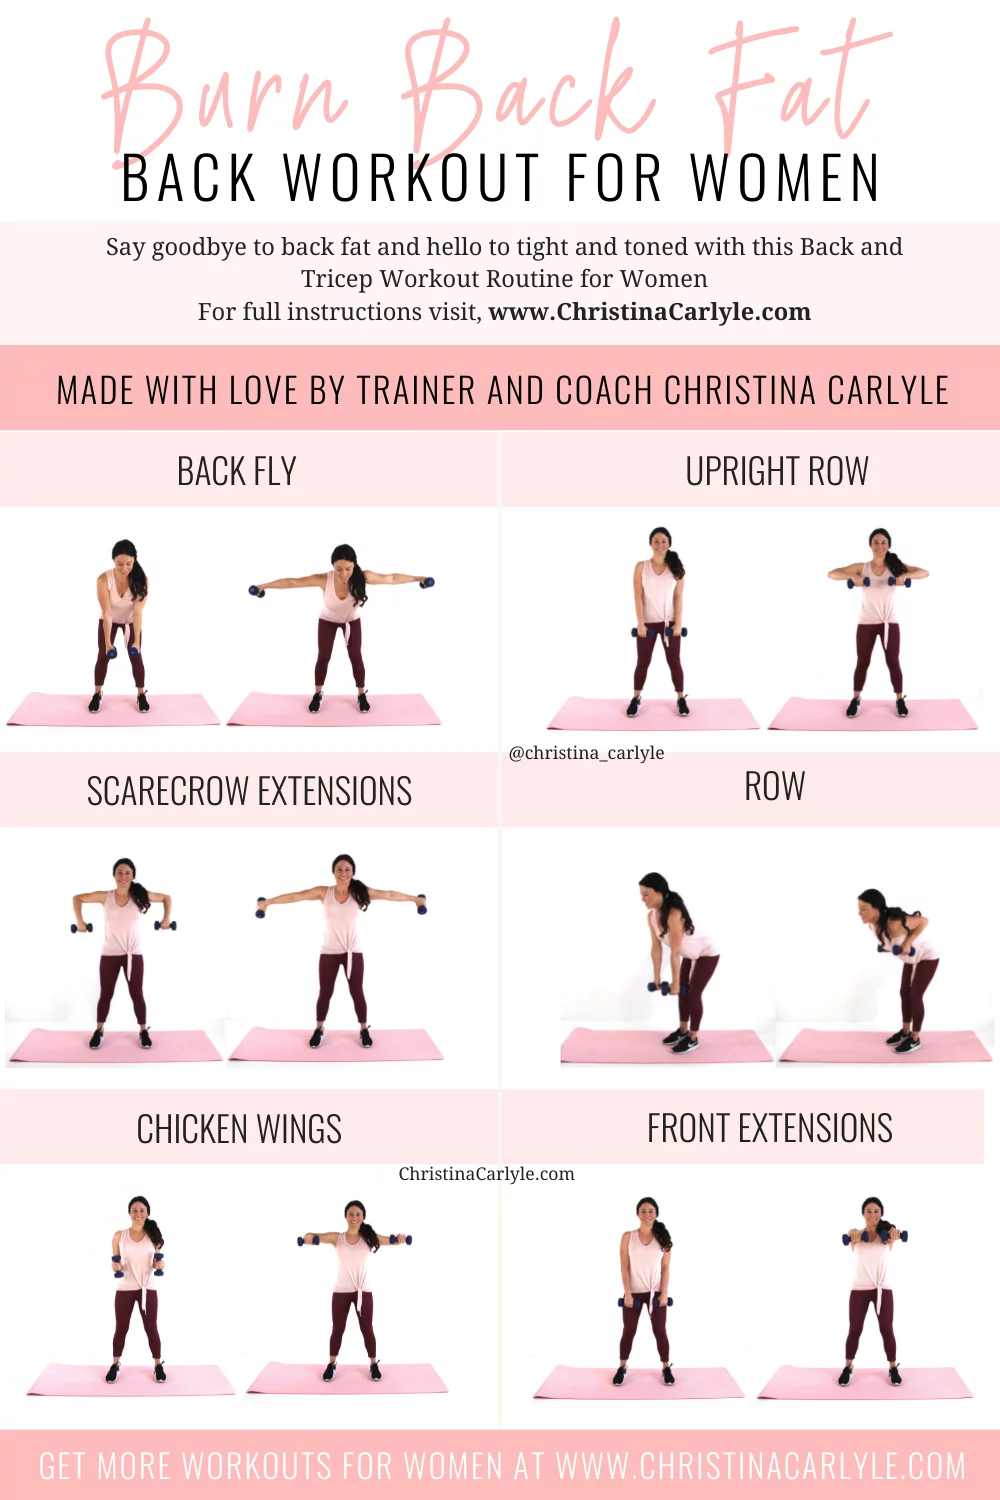 Back Workouts for Women